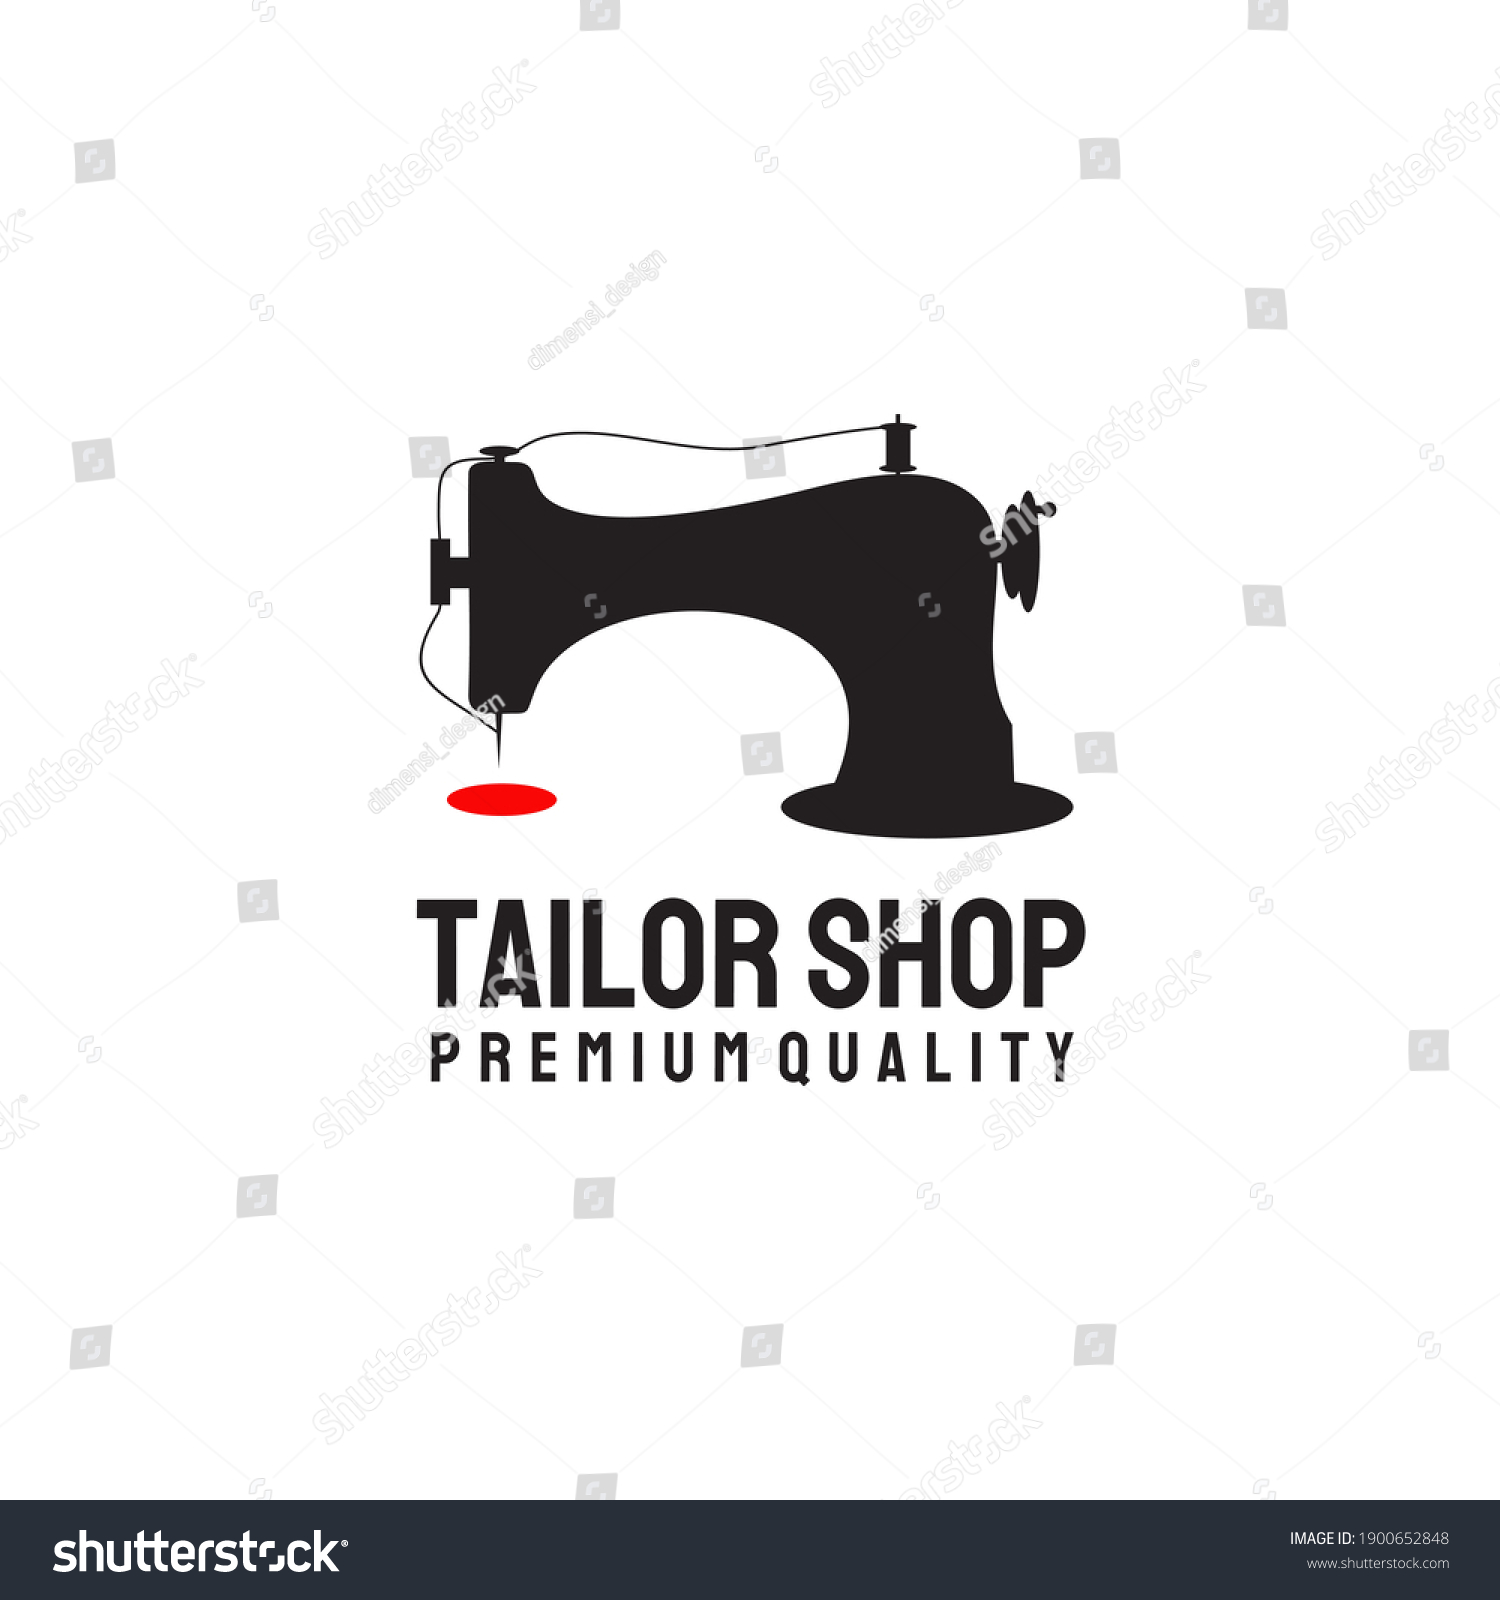 Sewing Machine Logo Design Template Tailor Stock Vector (Royalty Free ...